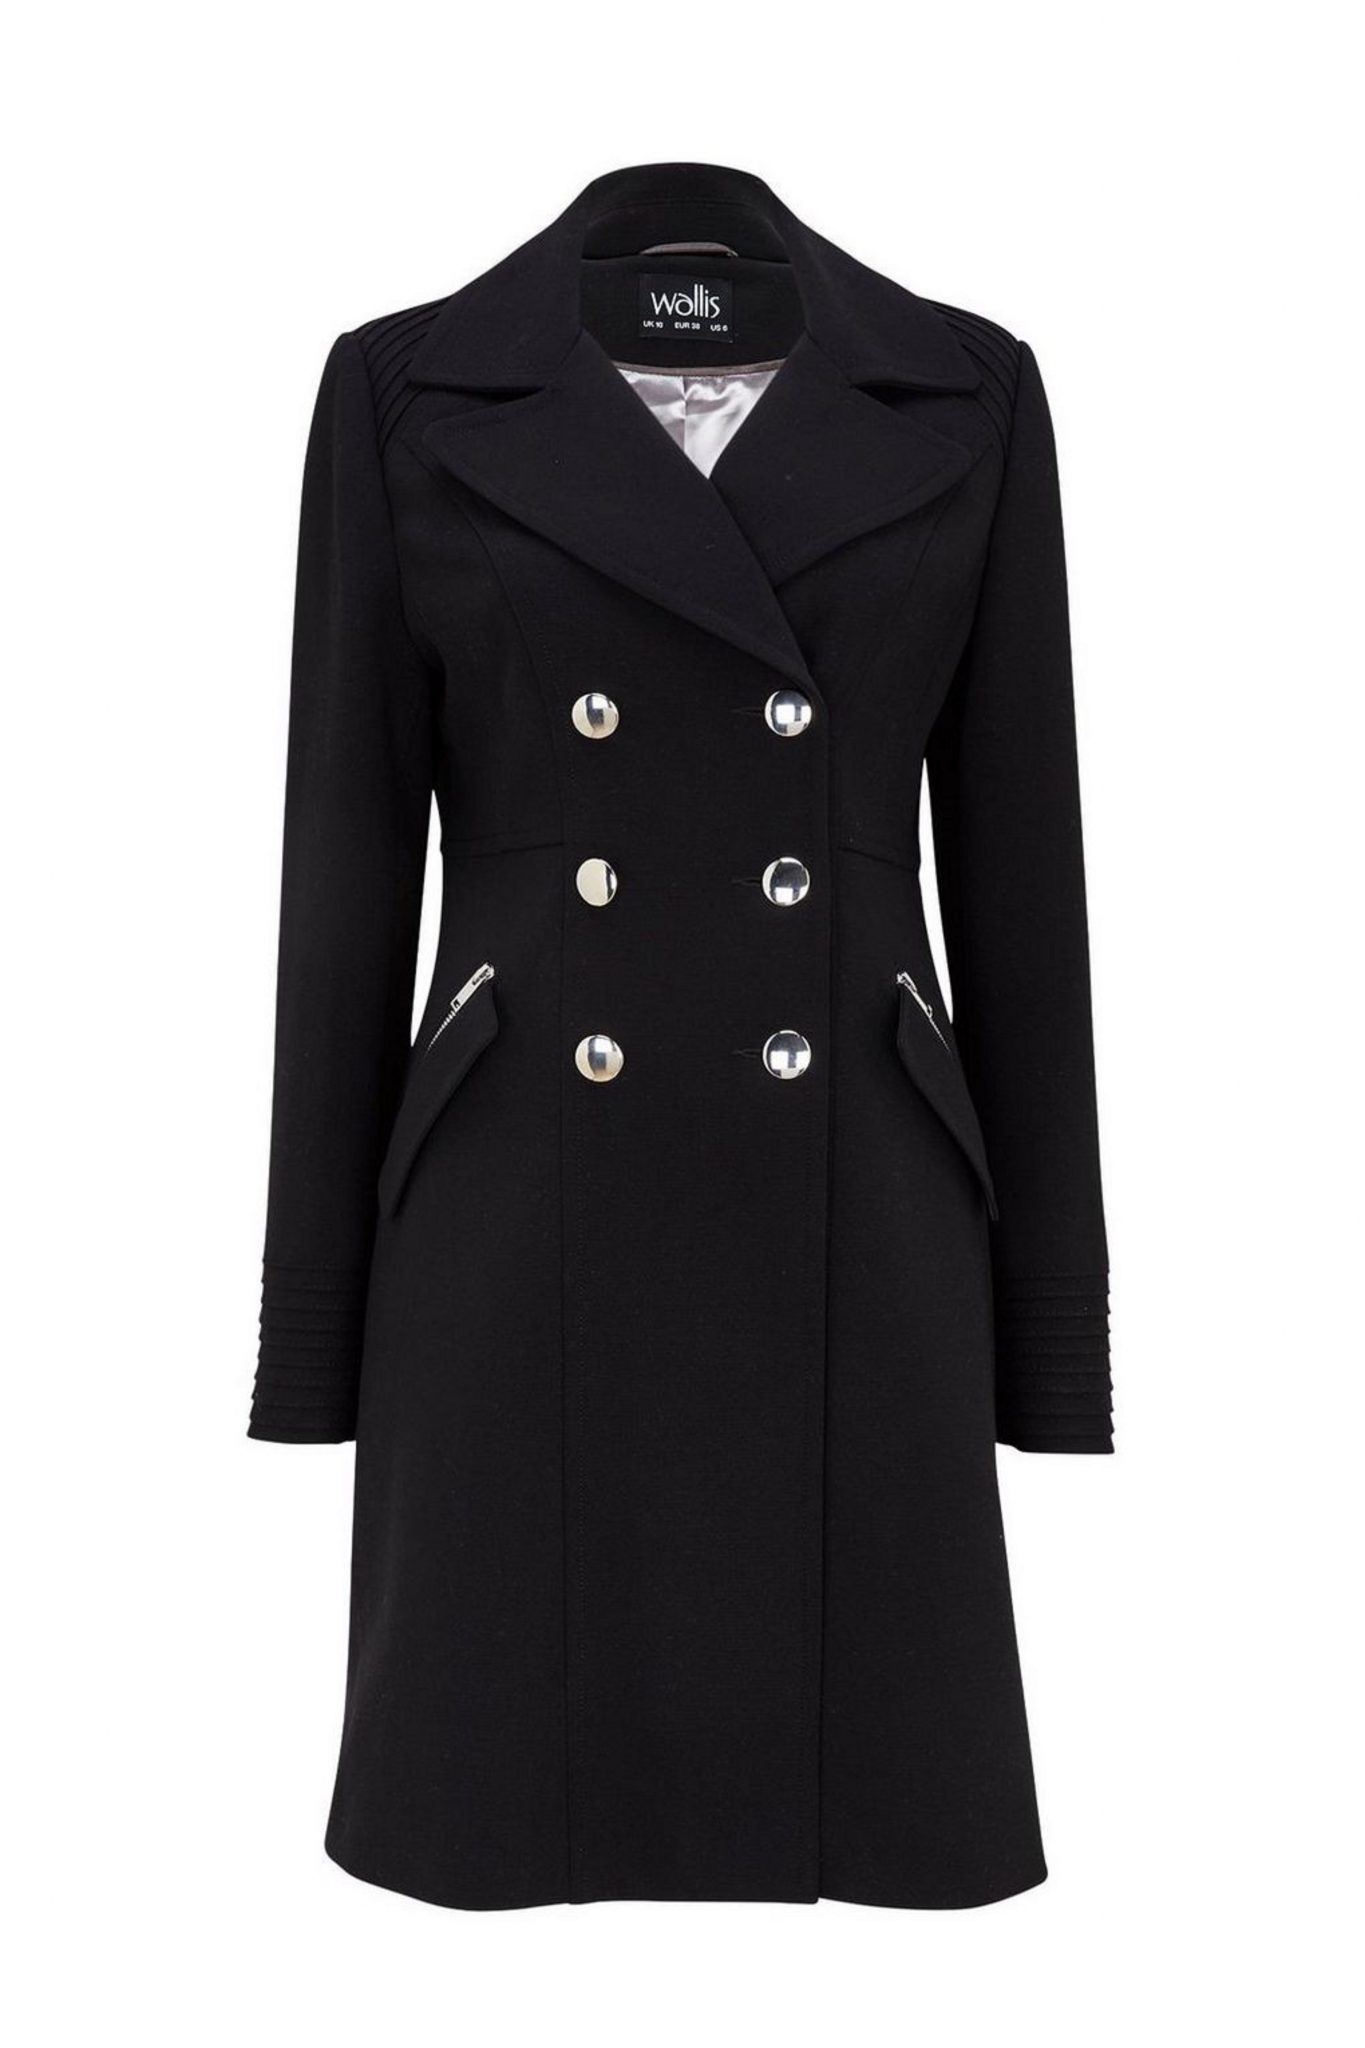 4 autumn coats for any occasion and how to style them